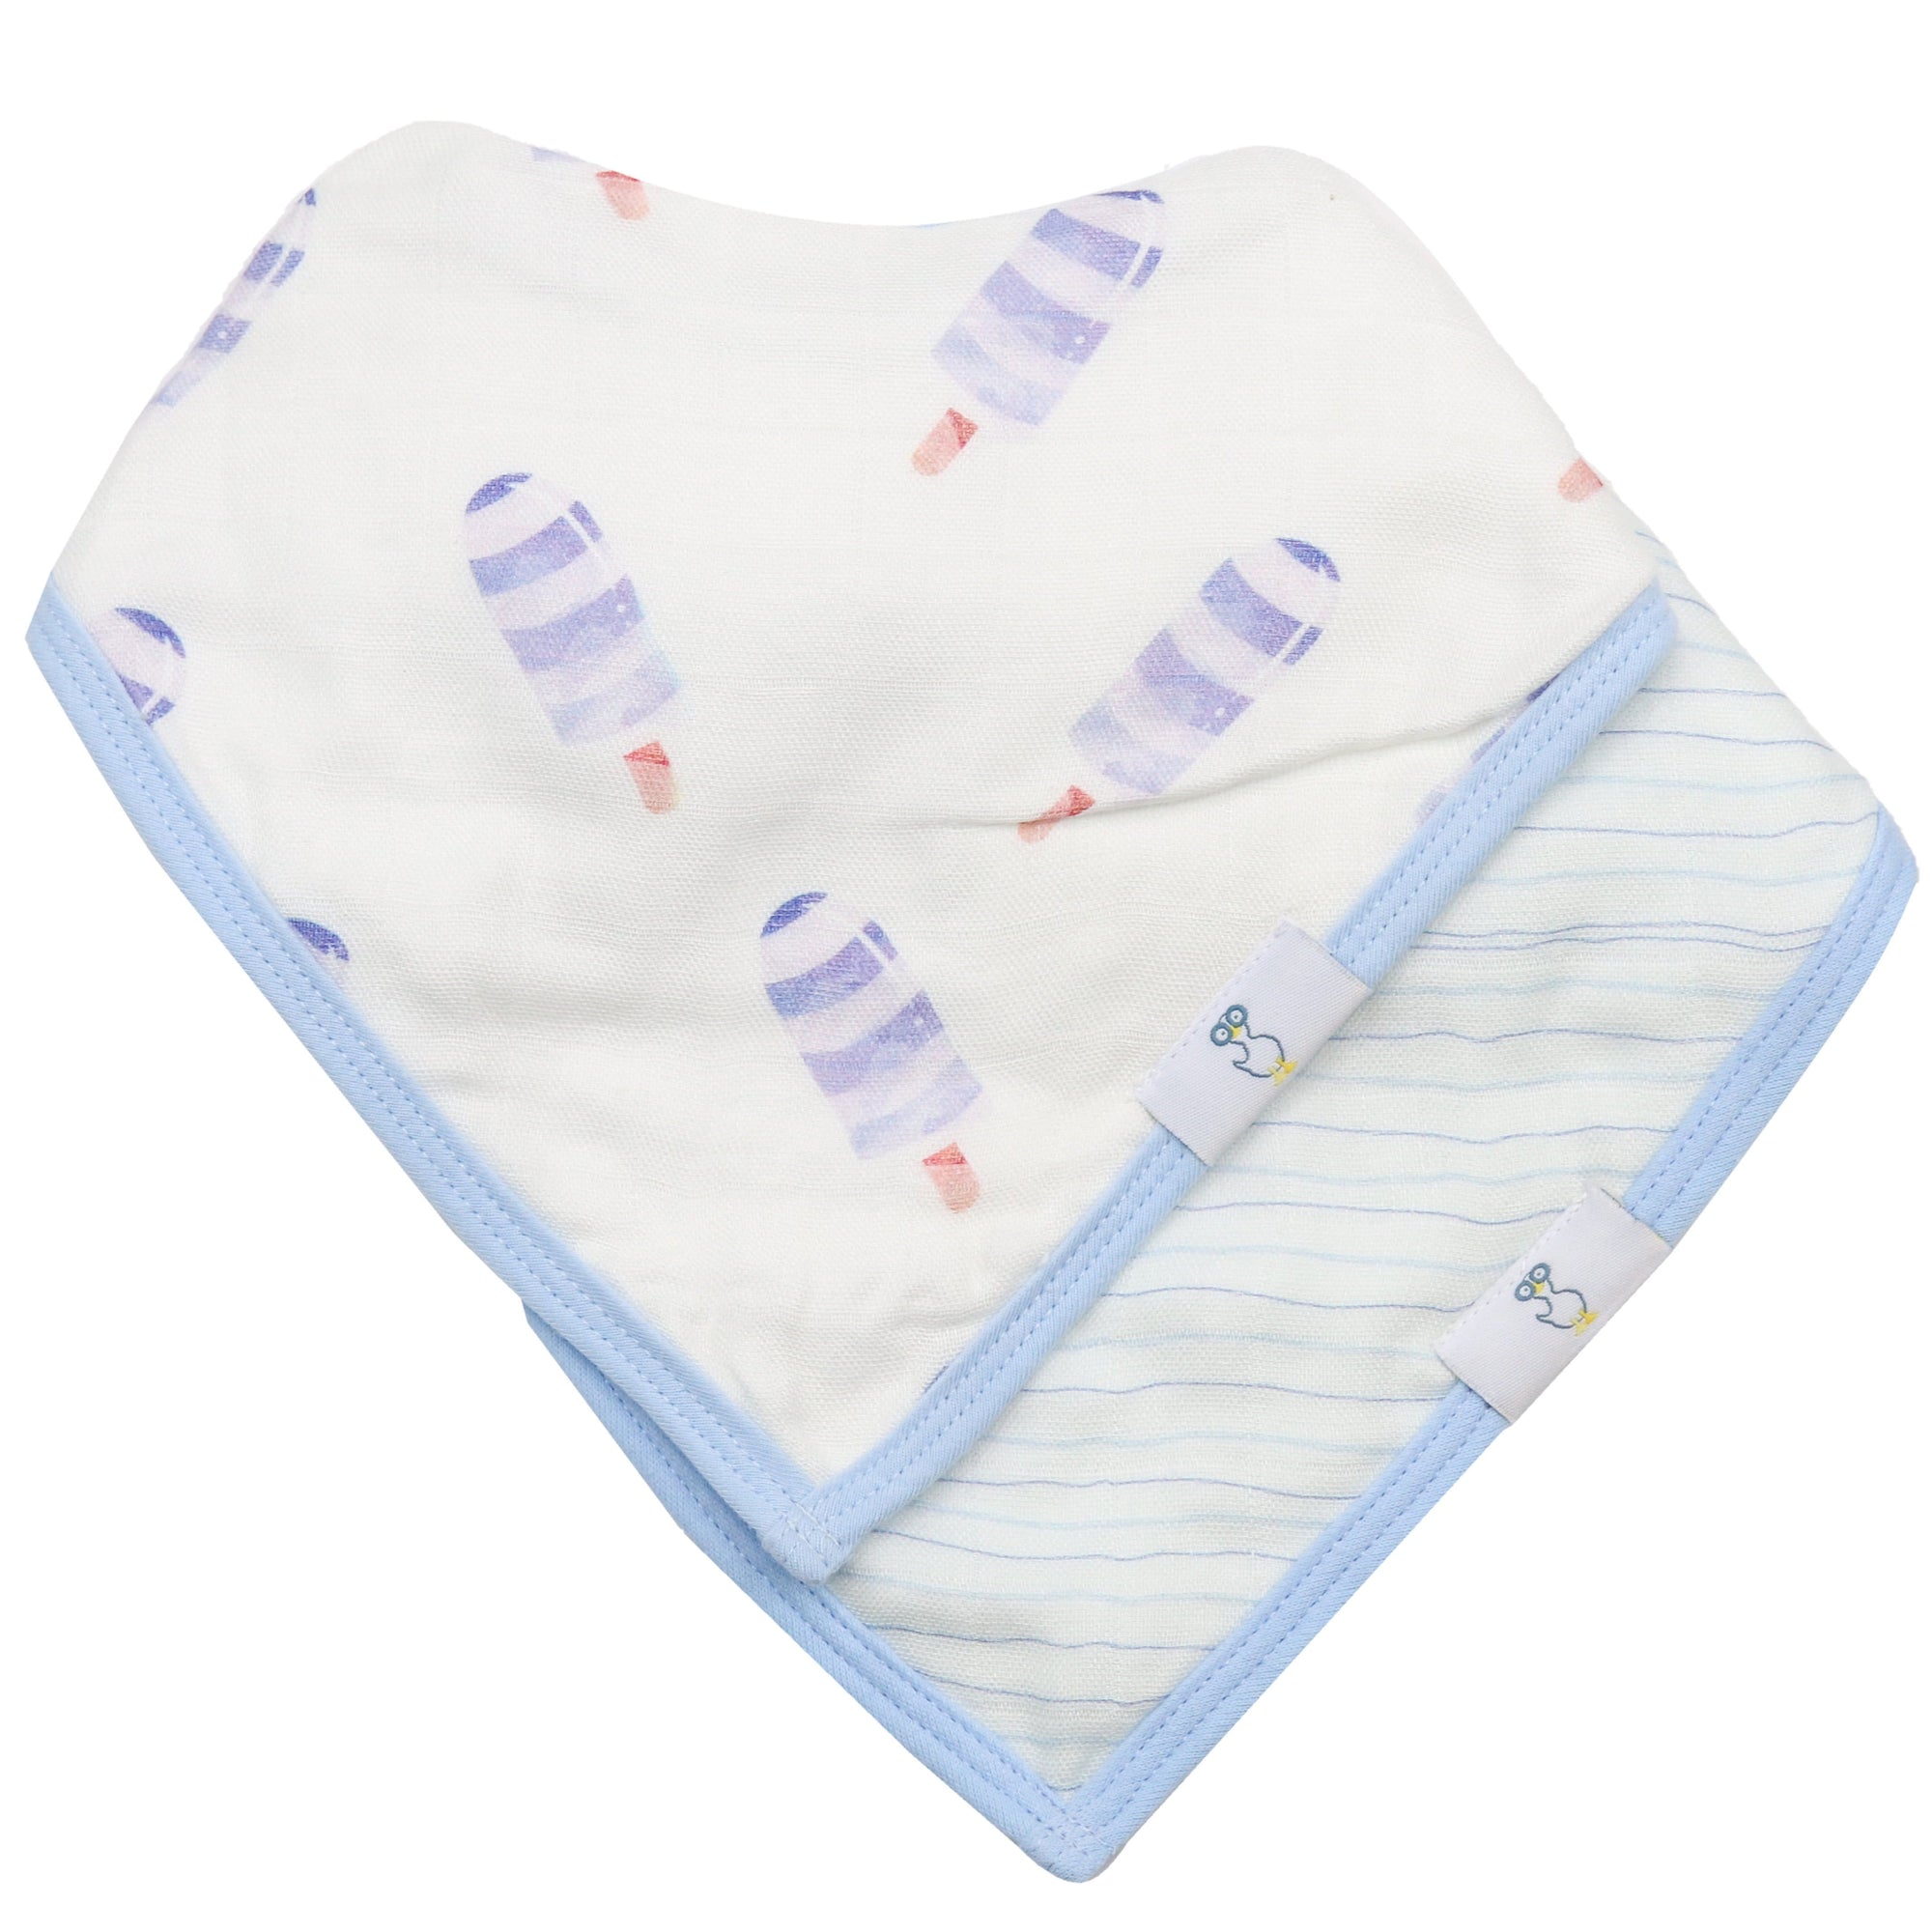 Goosewaddle 2 Pack Muslin & Terry Cloth Bib Set, Blue Popsicles and Stripes